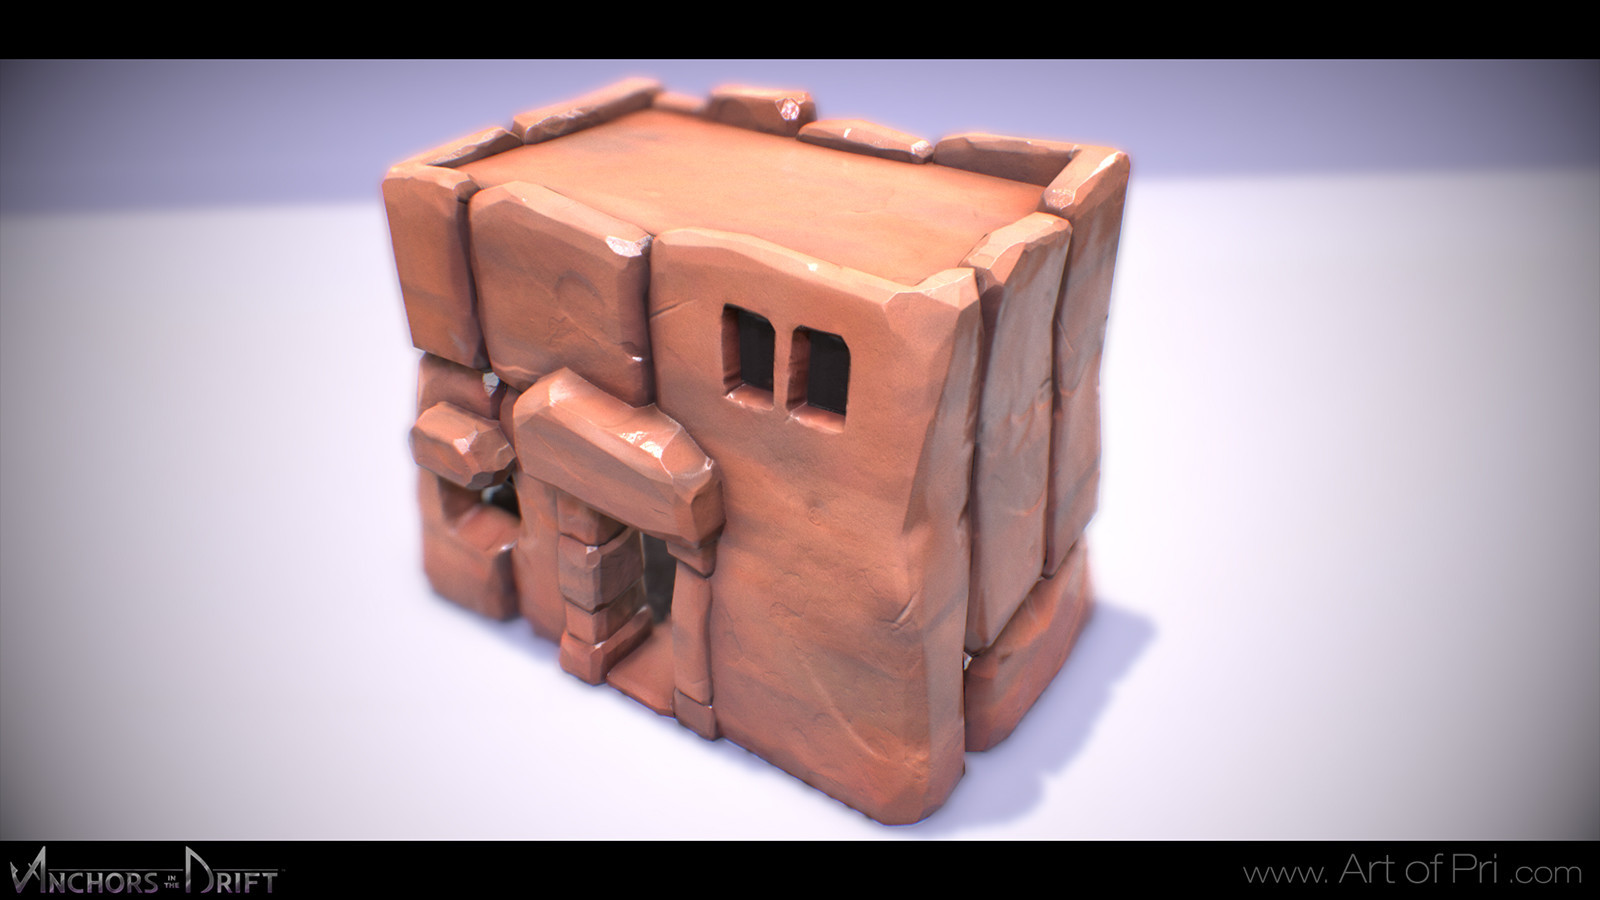 Egyptian Shack
Concept by Ari Bilow
Model by Me